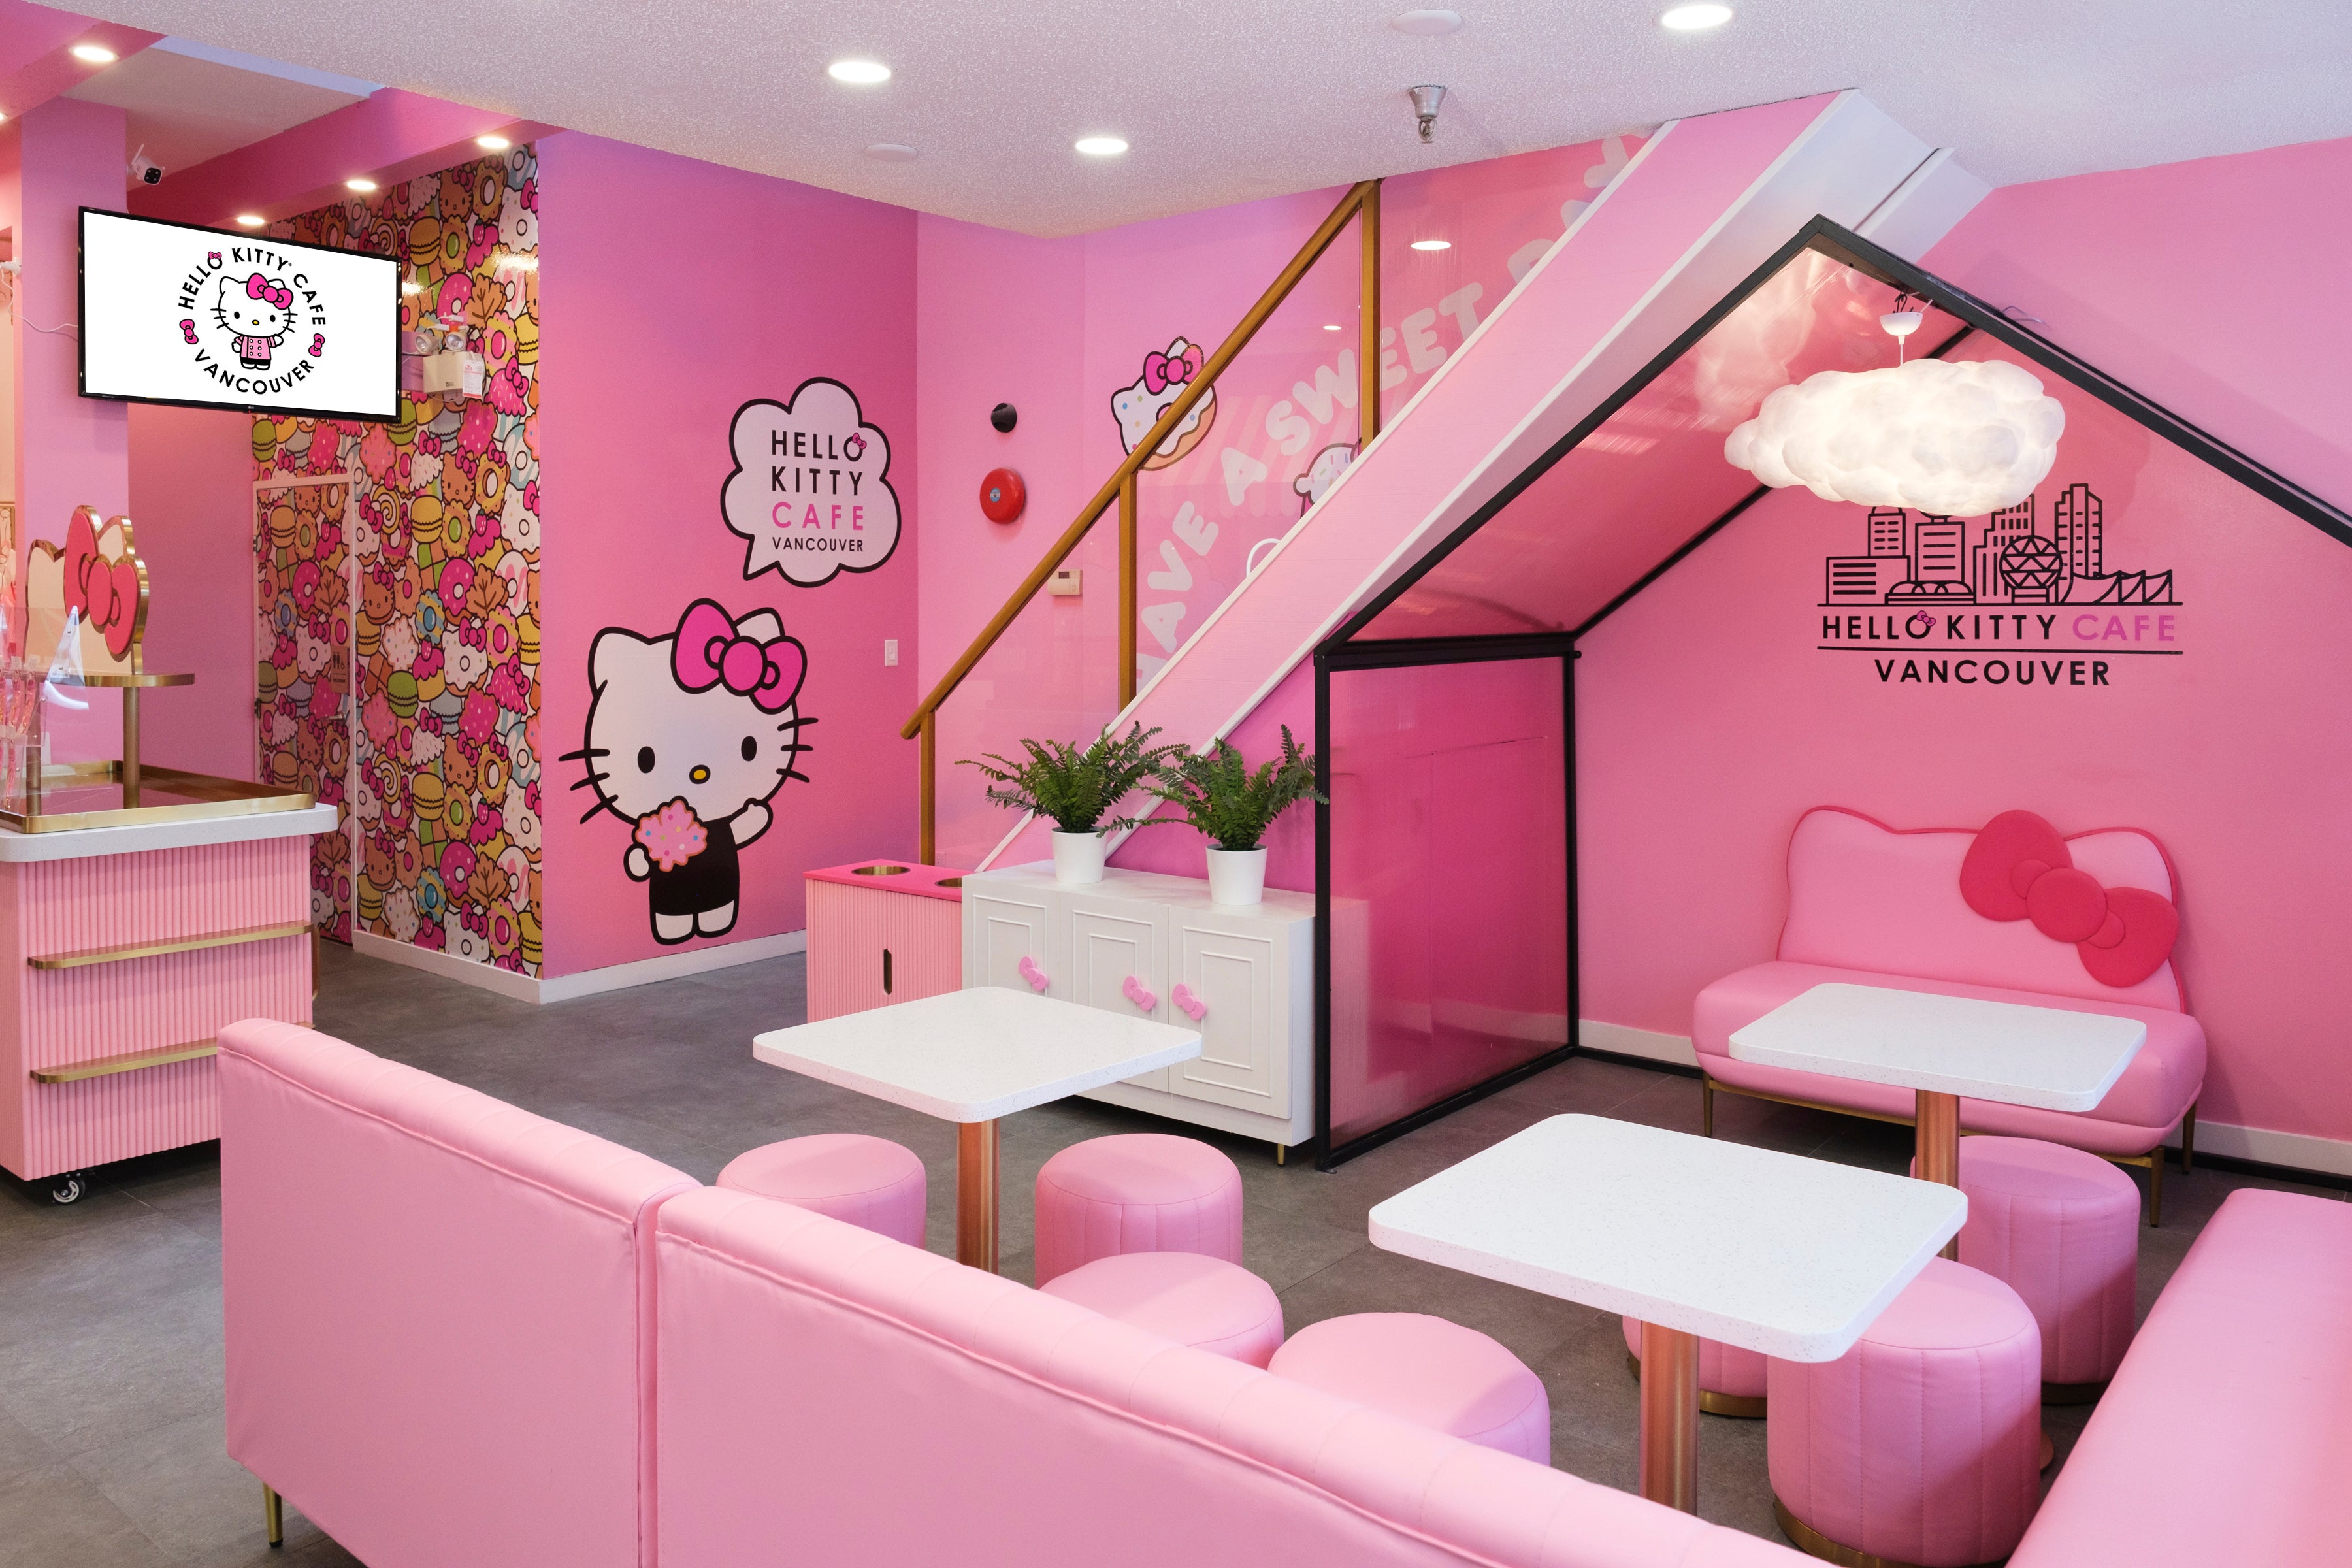 a view of the Vancouver Hello Kitty cafe with pink seats and white table tops